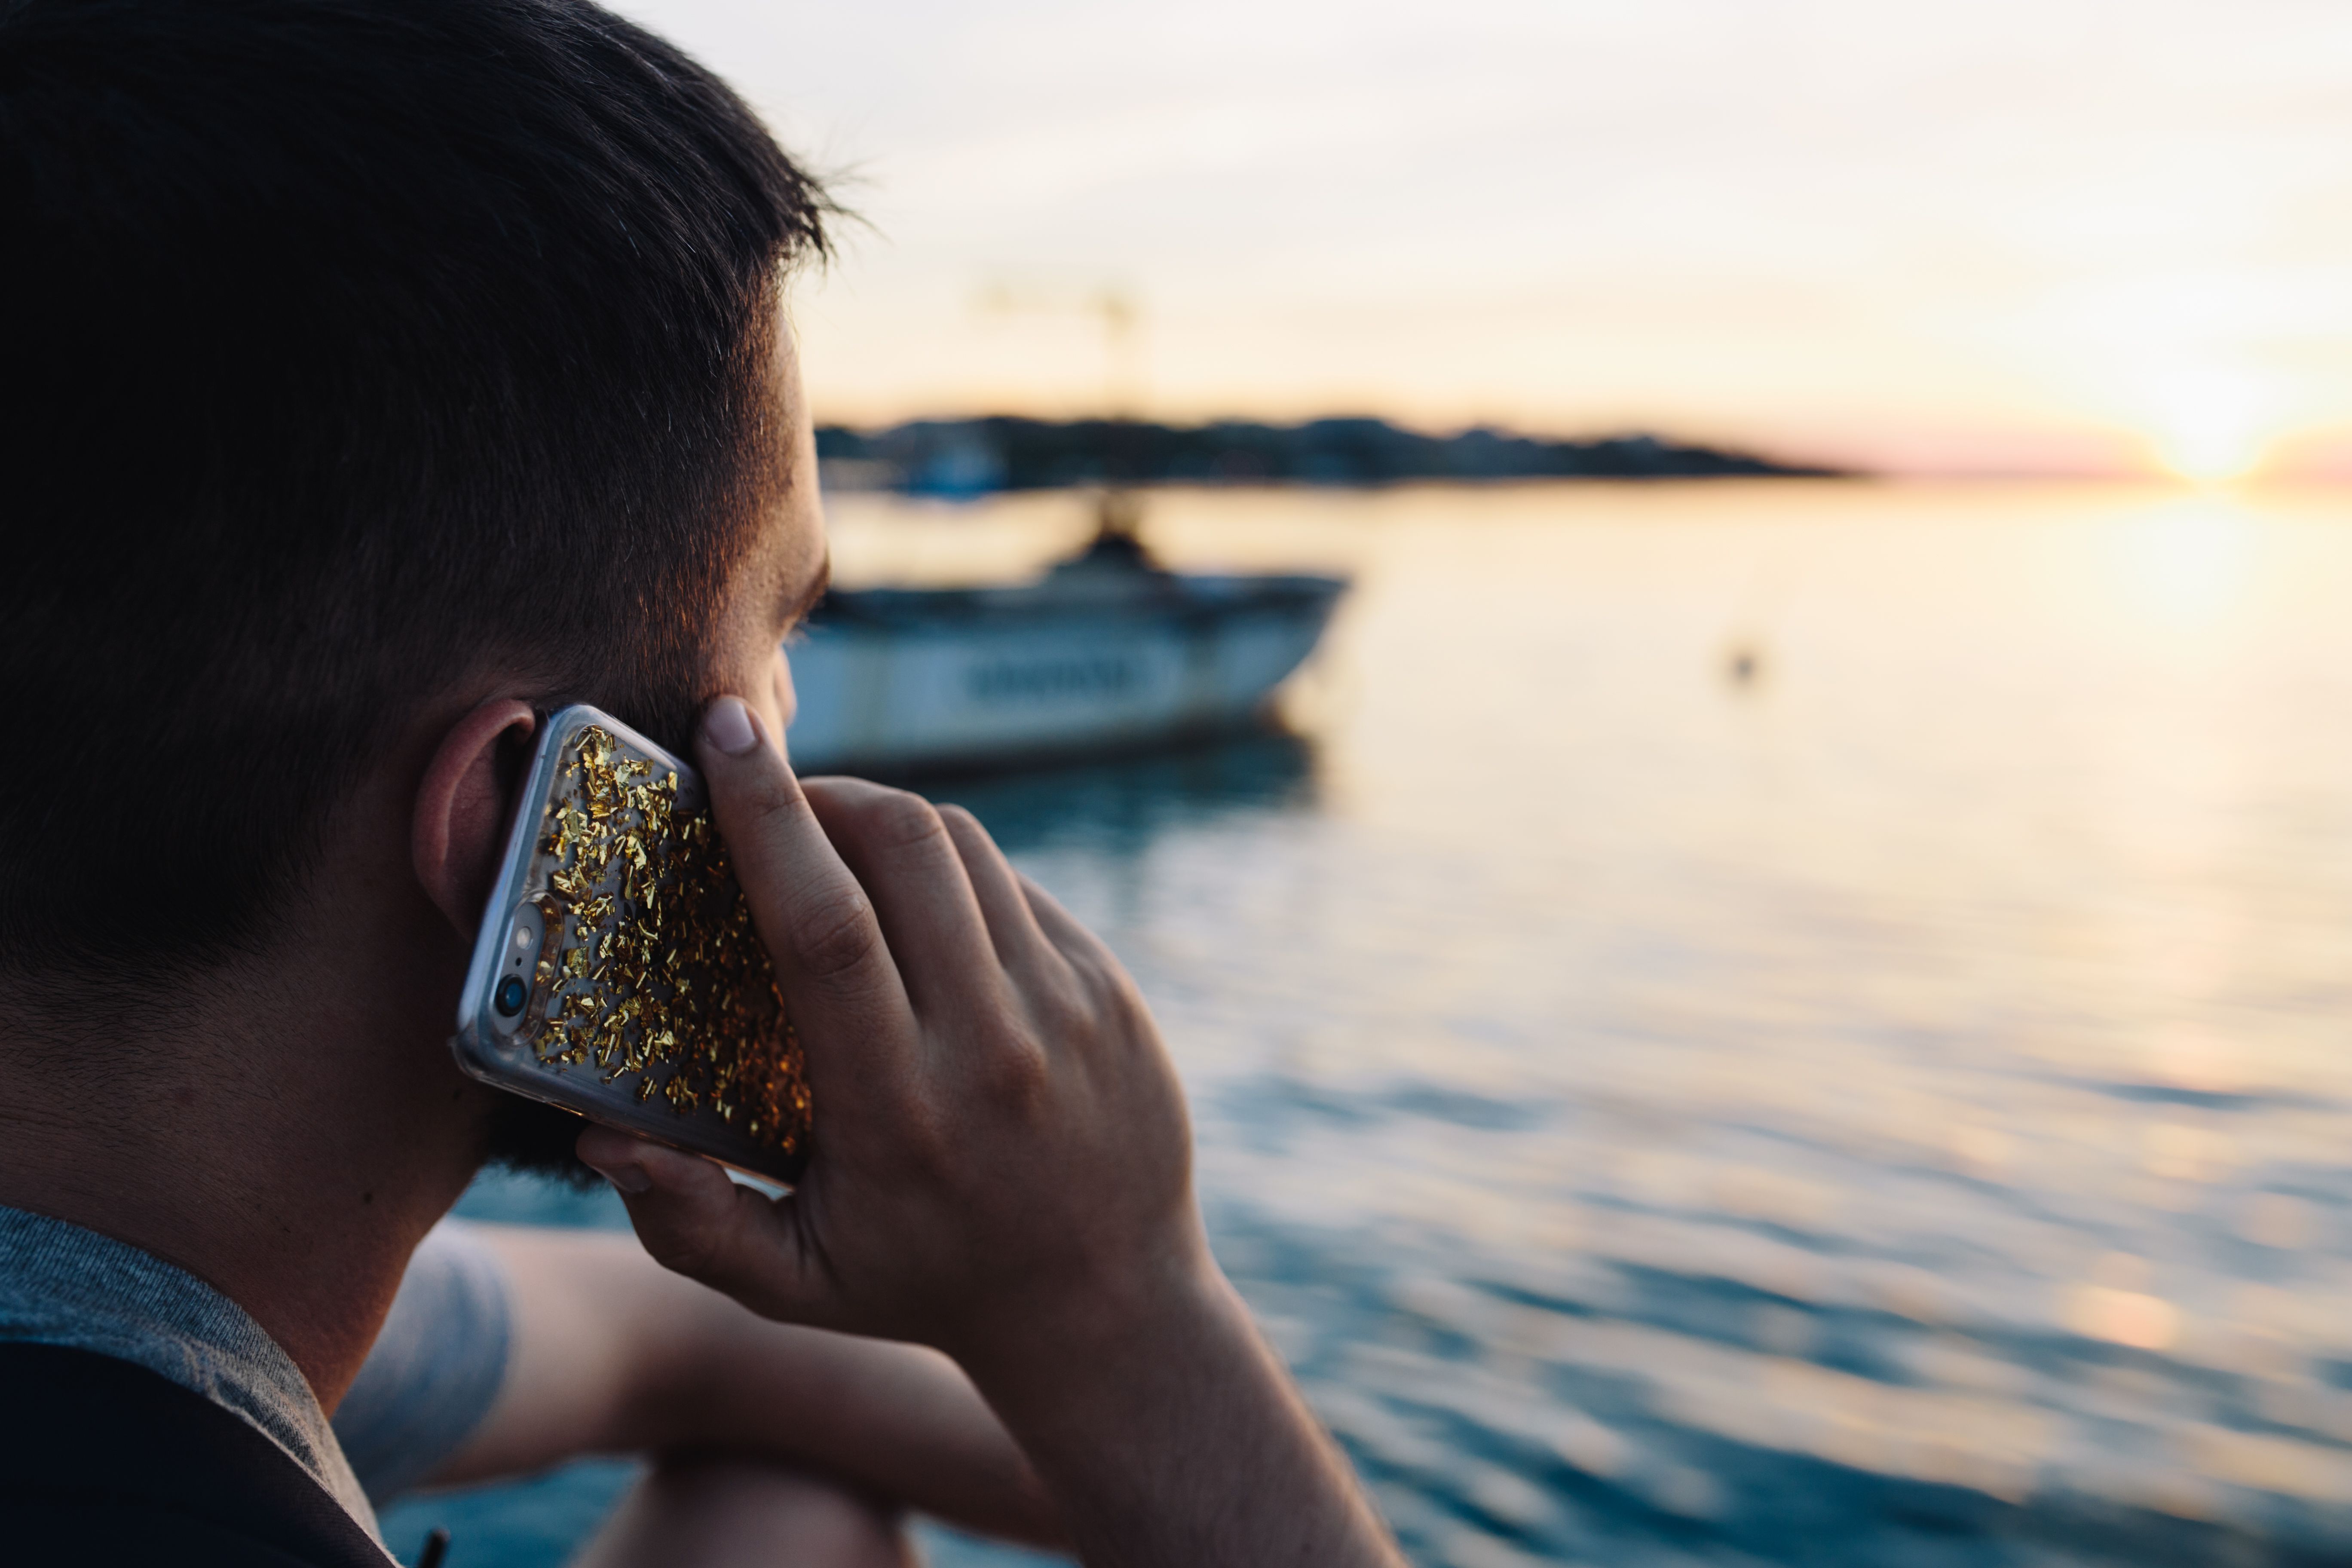 Mobile phone in man's hands near the sea